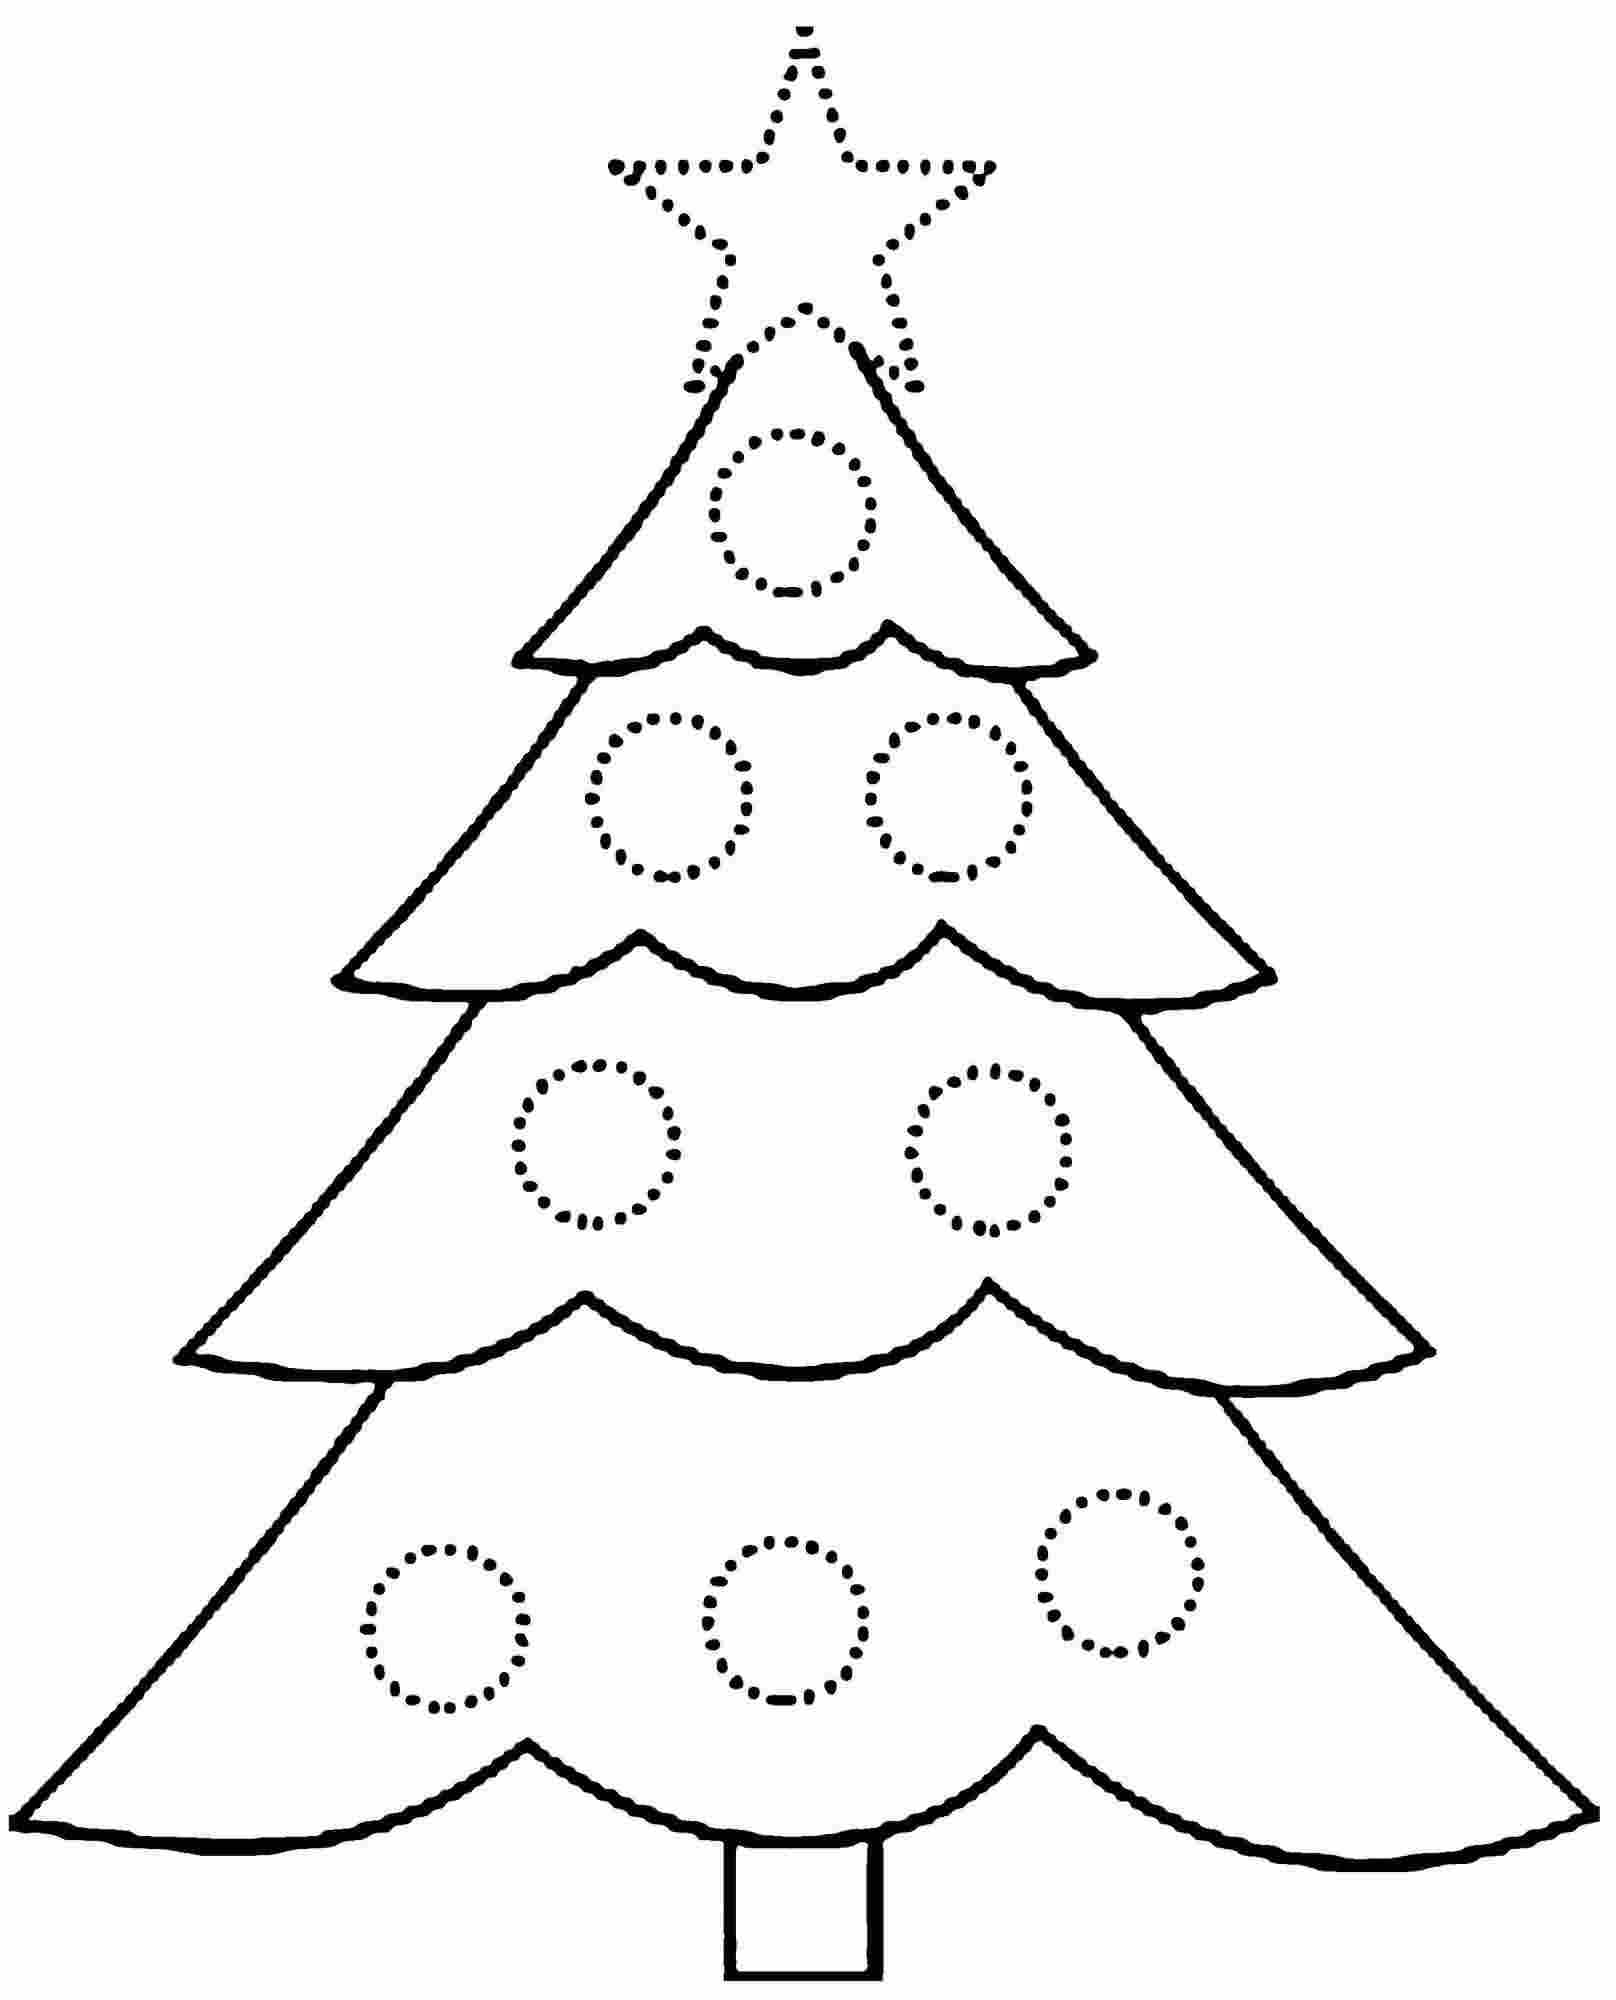 Christmas Tree Coloring Pages Image Picture Photo Wallpaper 19